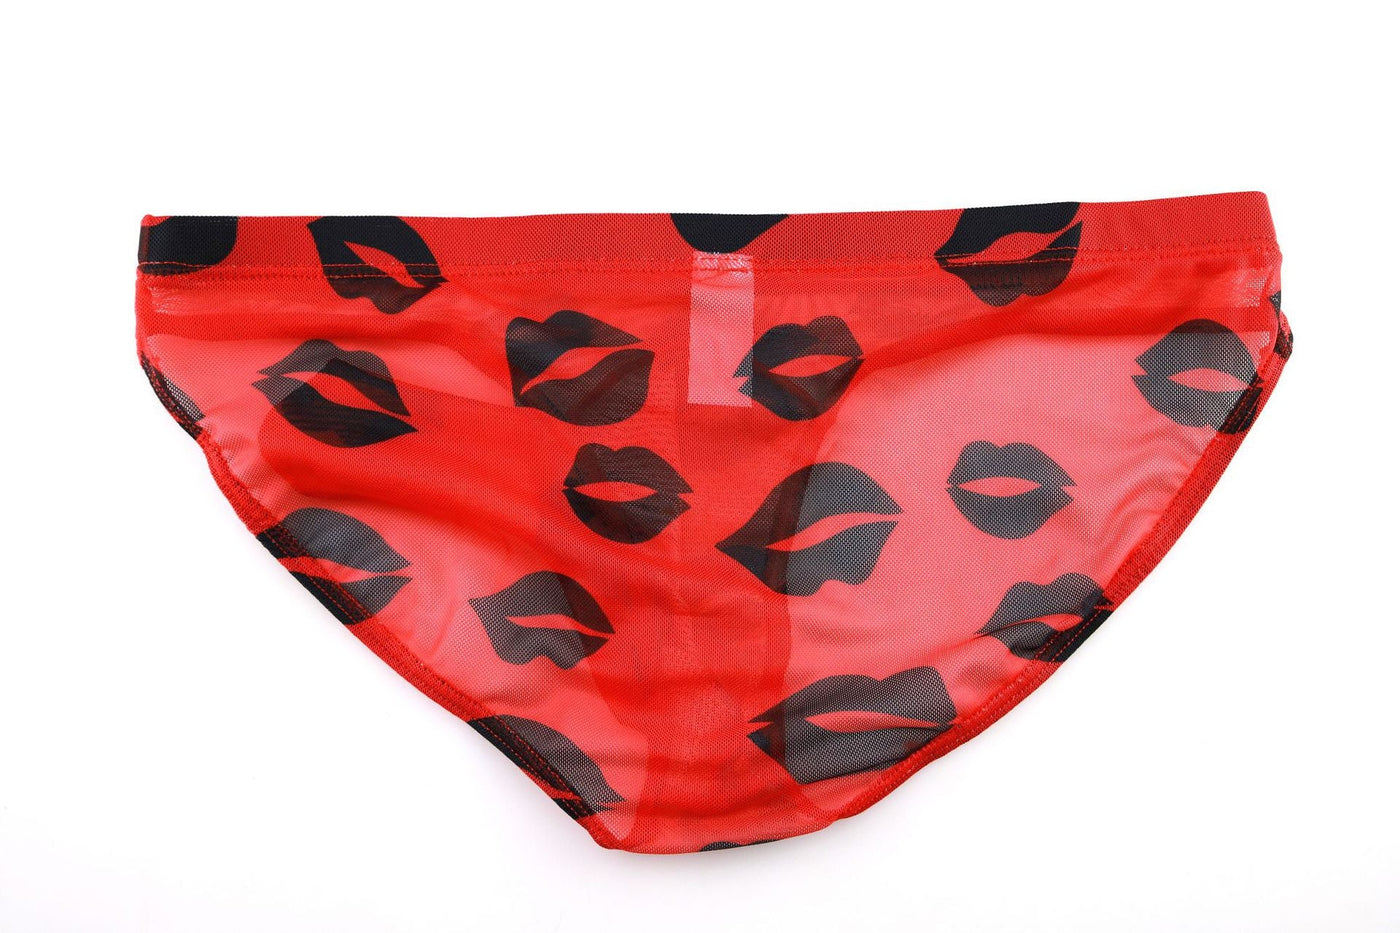 3 Pack Men's Printed Elephant Nose Sexy Underwear